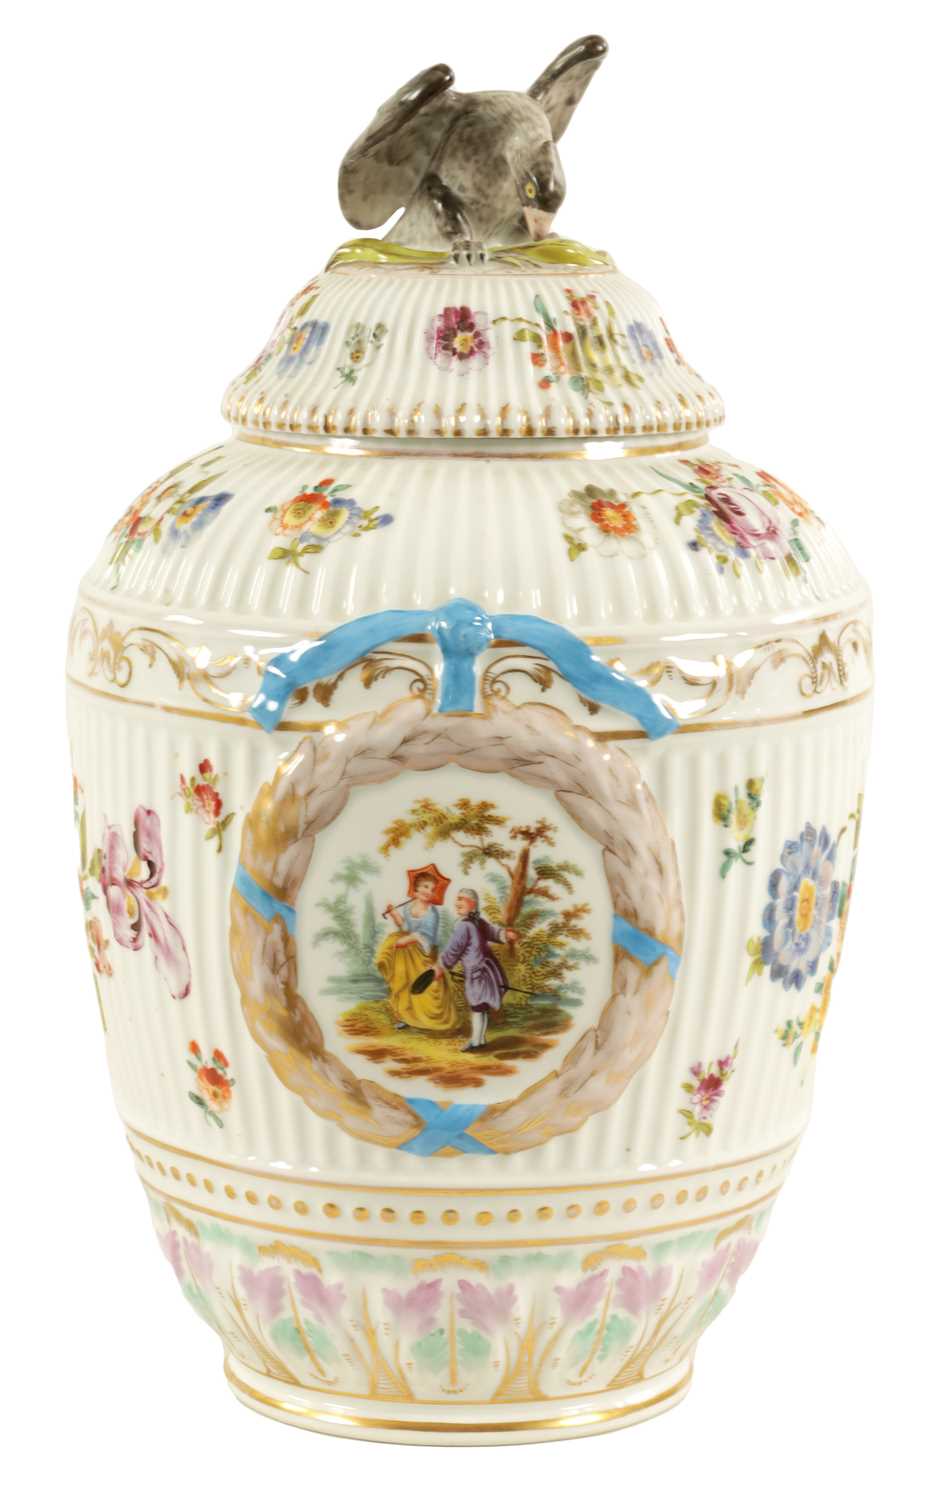 Lot 62 - A LATE 19TH CENTURY DRESDEN LARGE VASE AND COVER IN THE MANNER OF AUGUSTUS REX